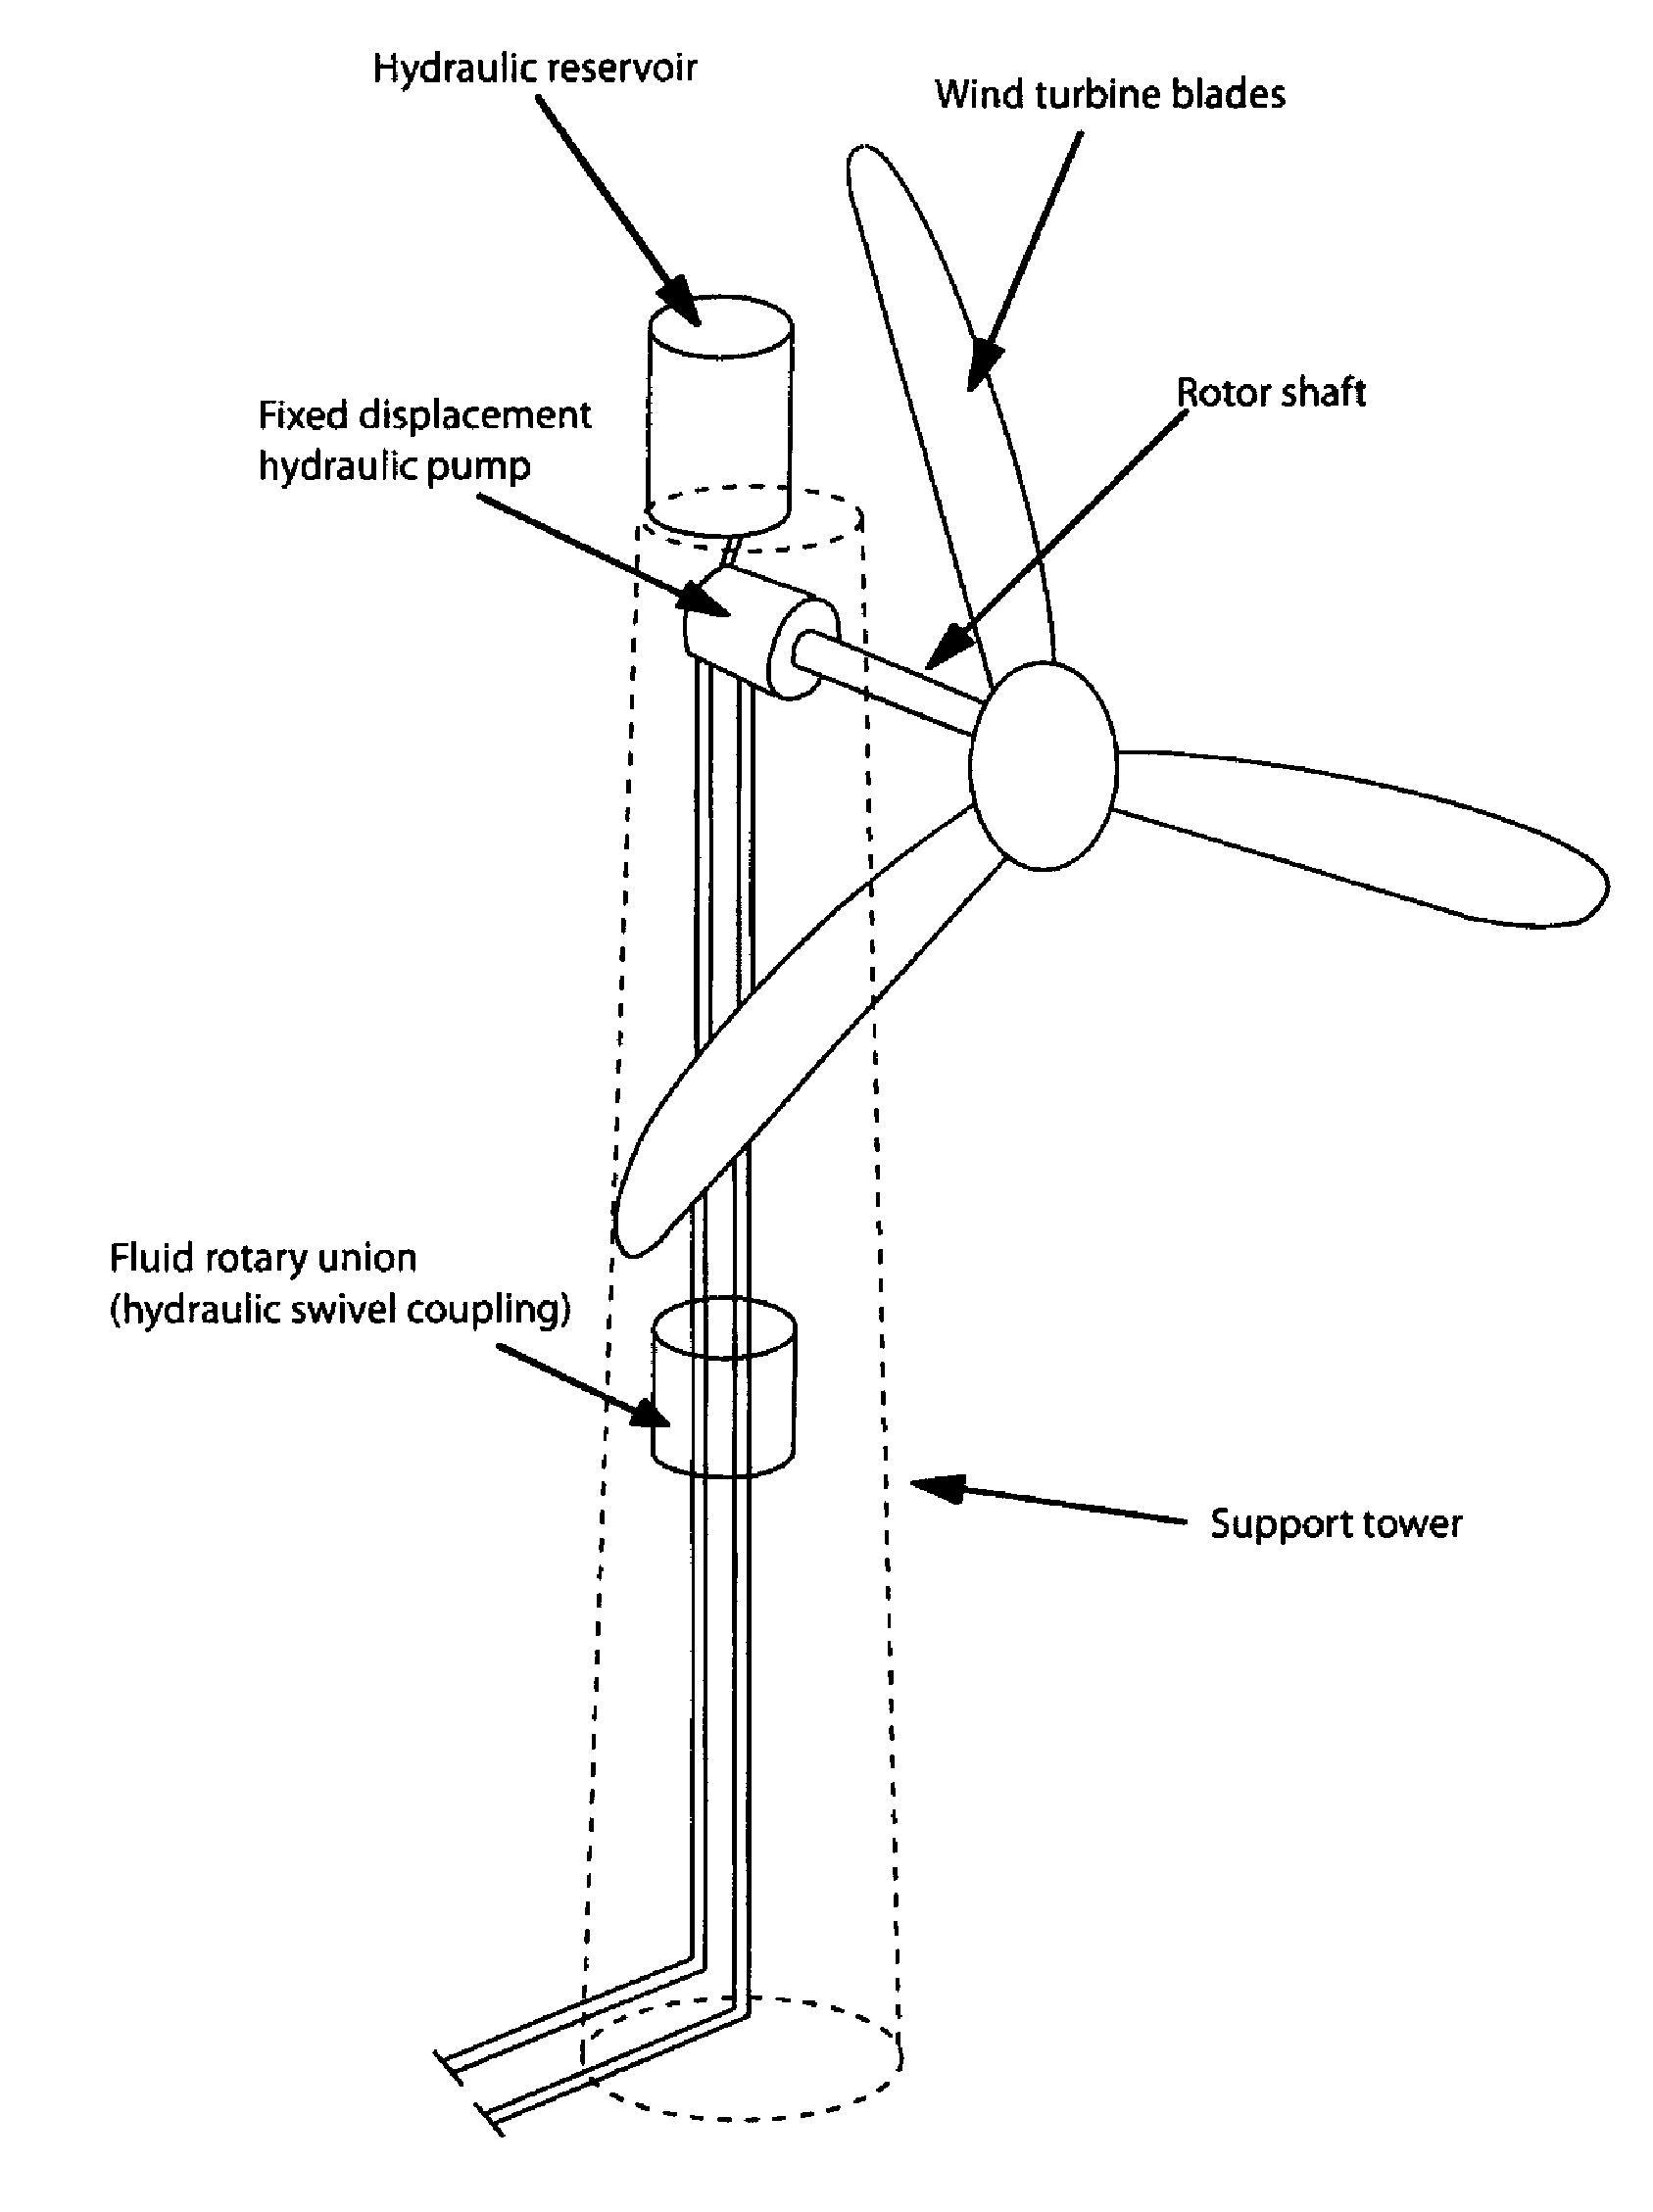 Wind To Electric Energy Conversion With Hydraulic Storage